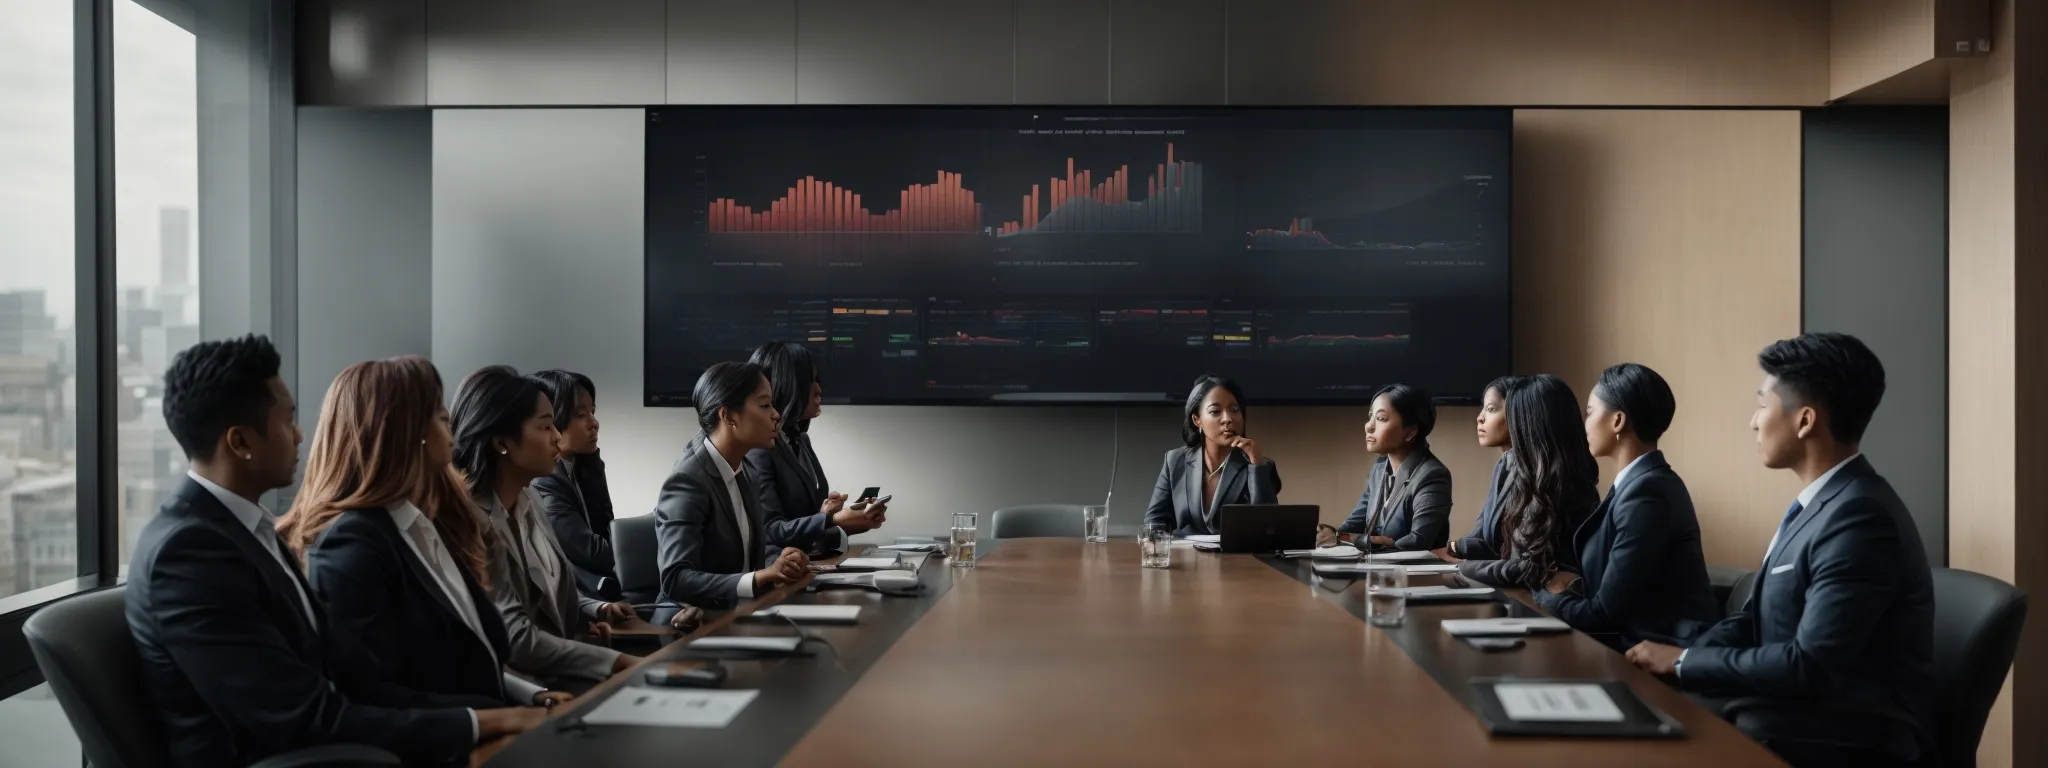 a diverse group of marketing professionals gathers around a modern conference table, with their focus intently set on a large screen displaying a data-rich interface of an up-and-coming visual search platform.